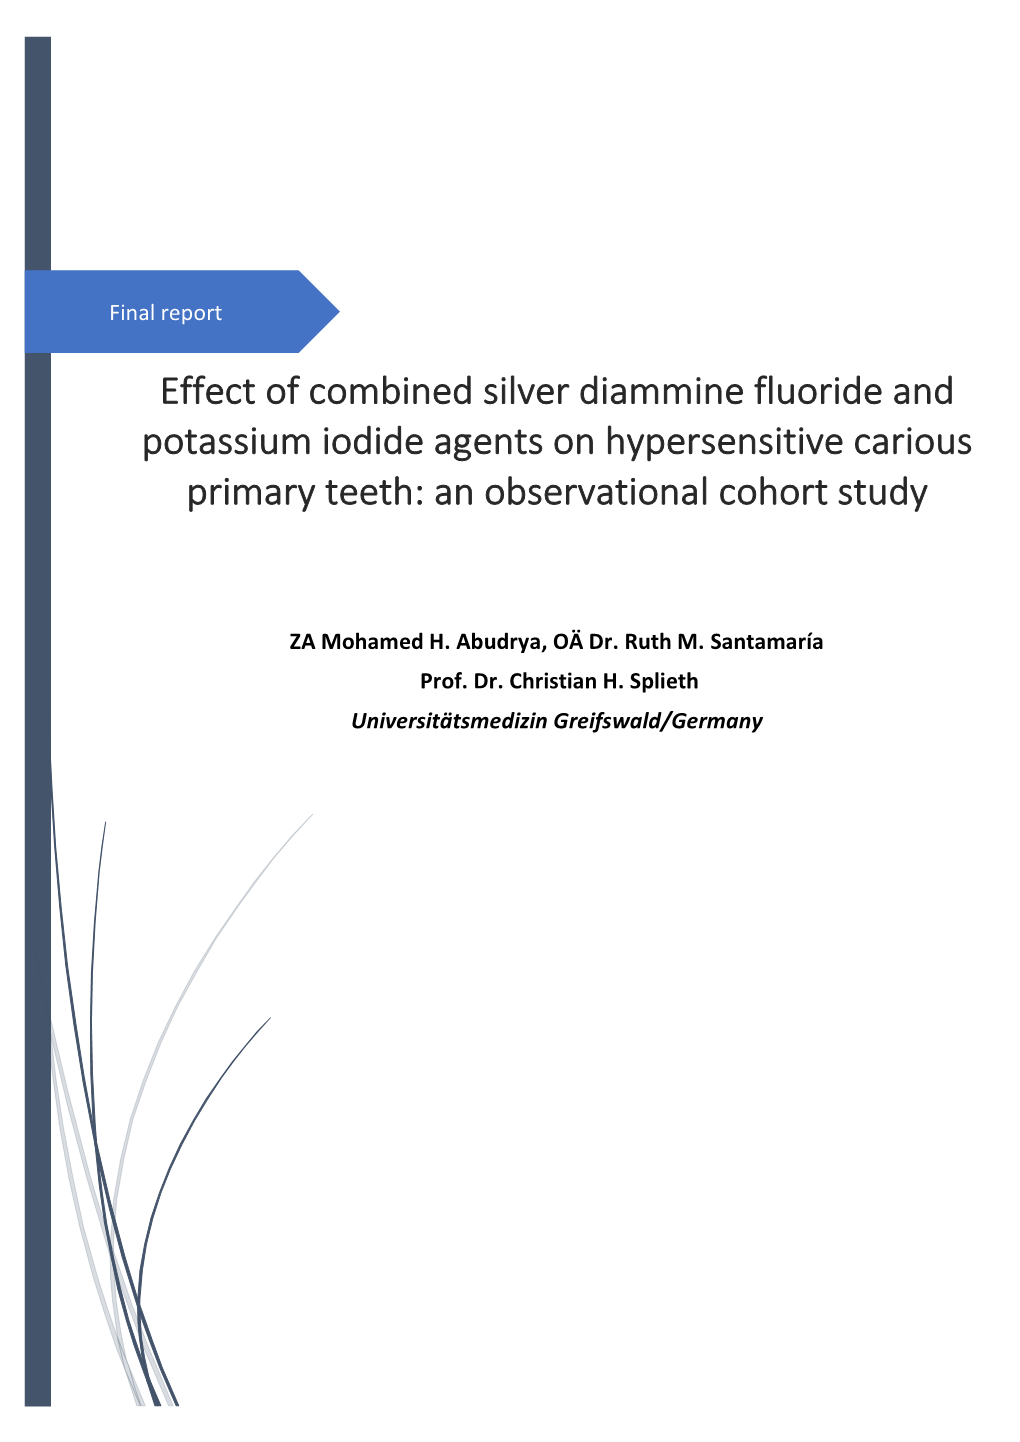 Effect of Combined Silver Diammine Fluoride and Potassium Iodide Agents on Hypersensitive Carious Primary Teeth: an Observational Cohort Study